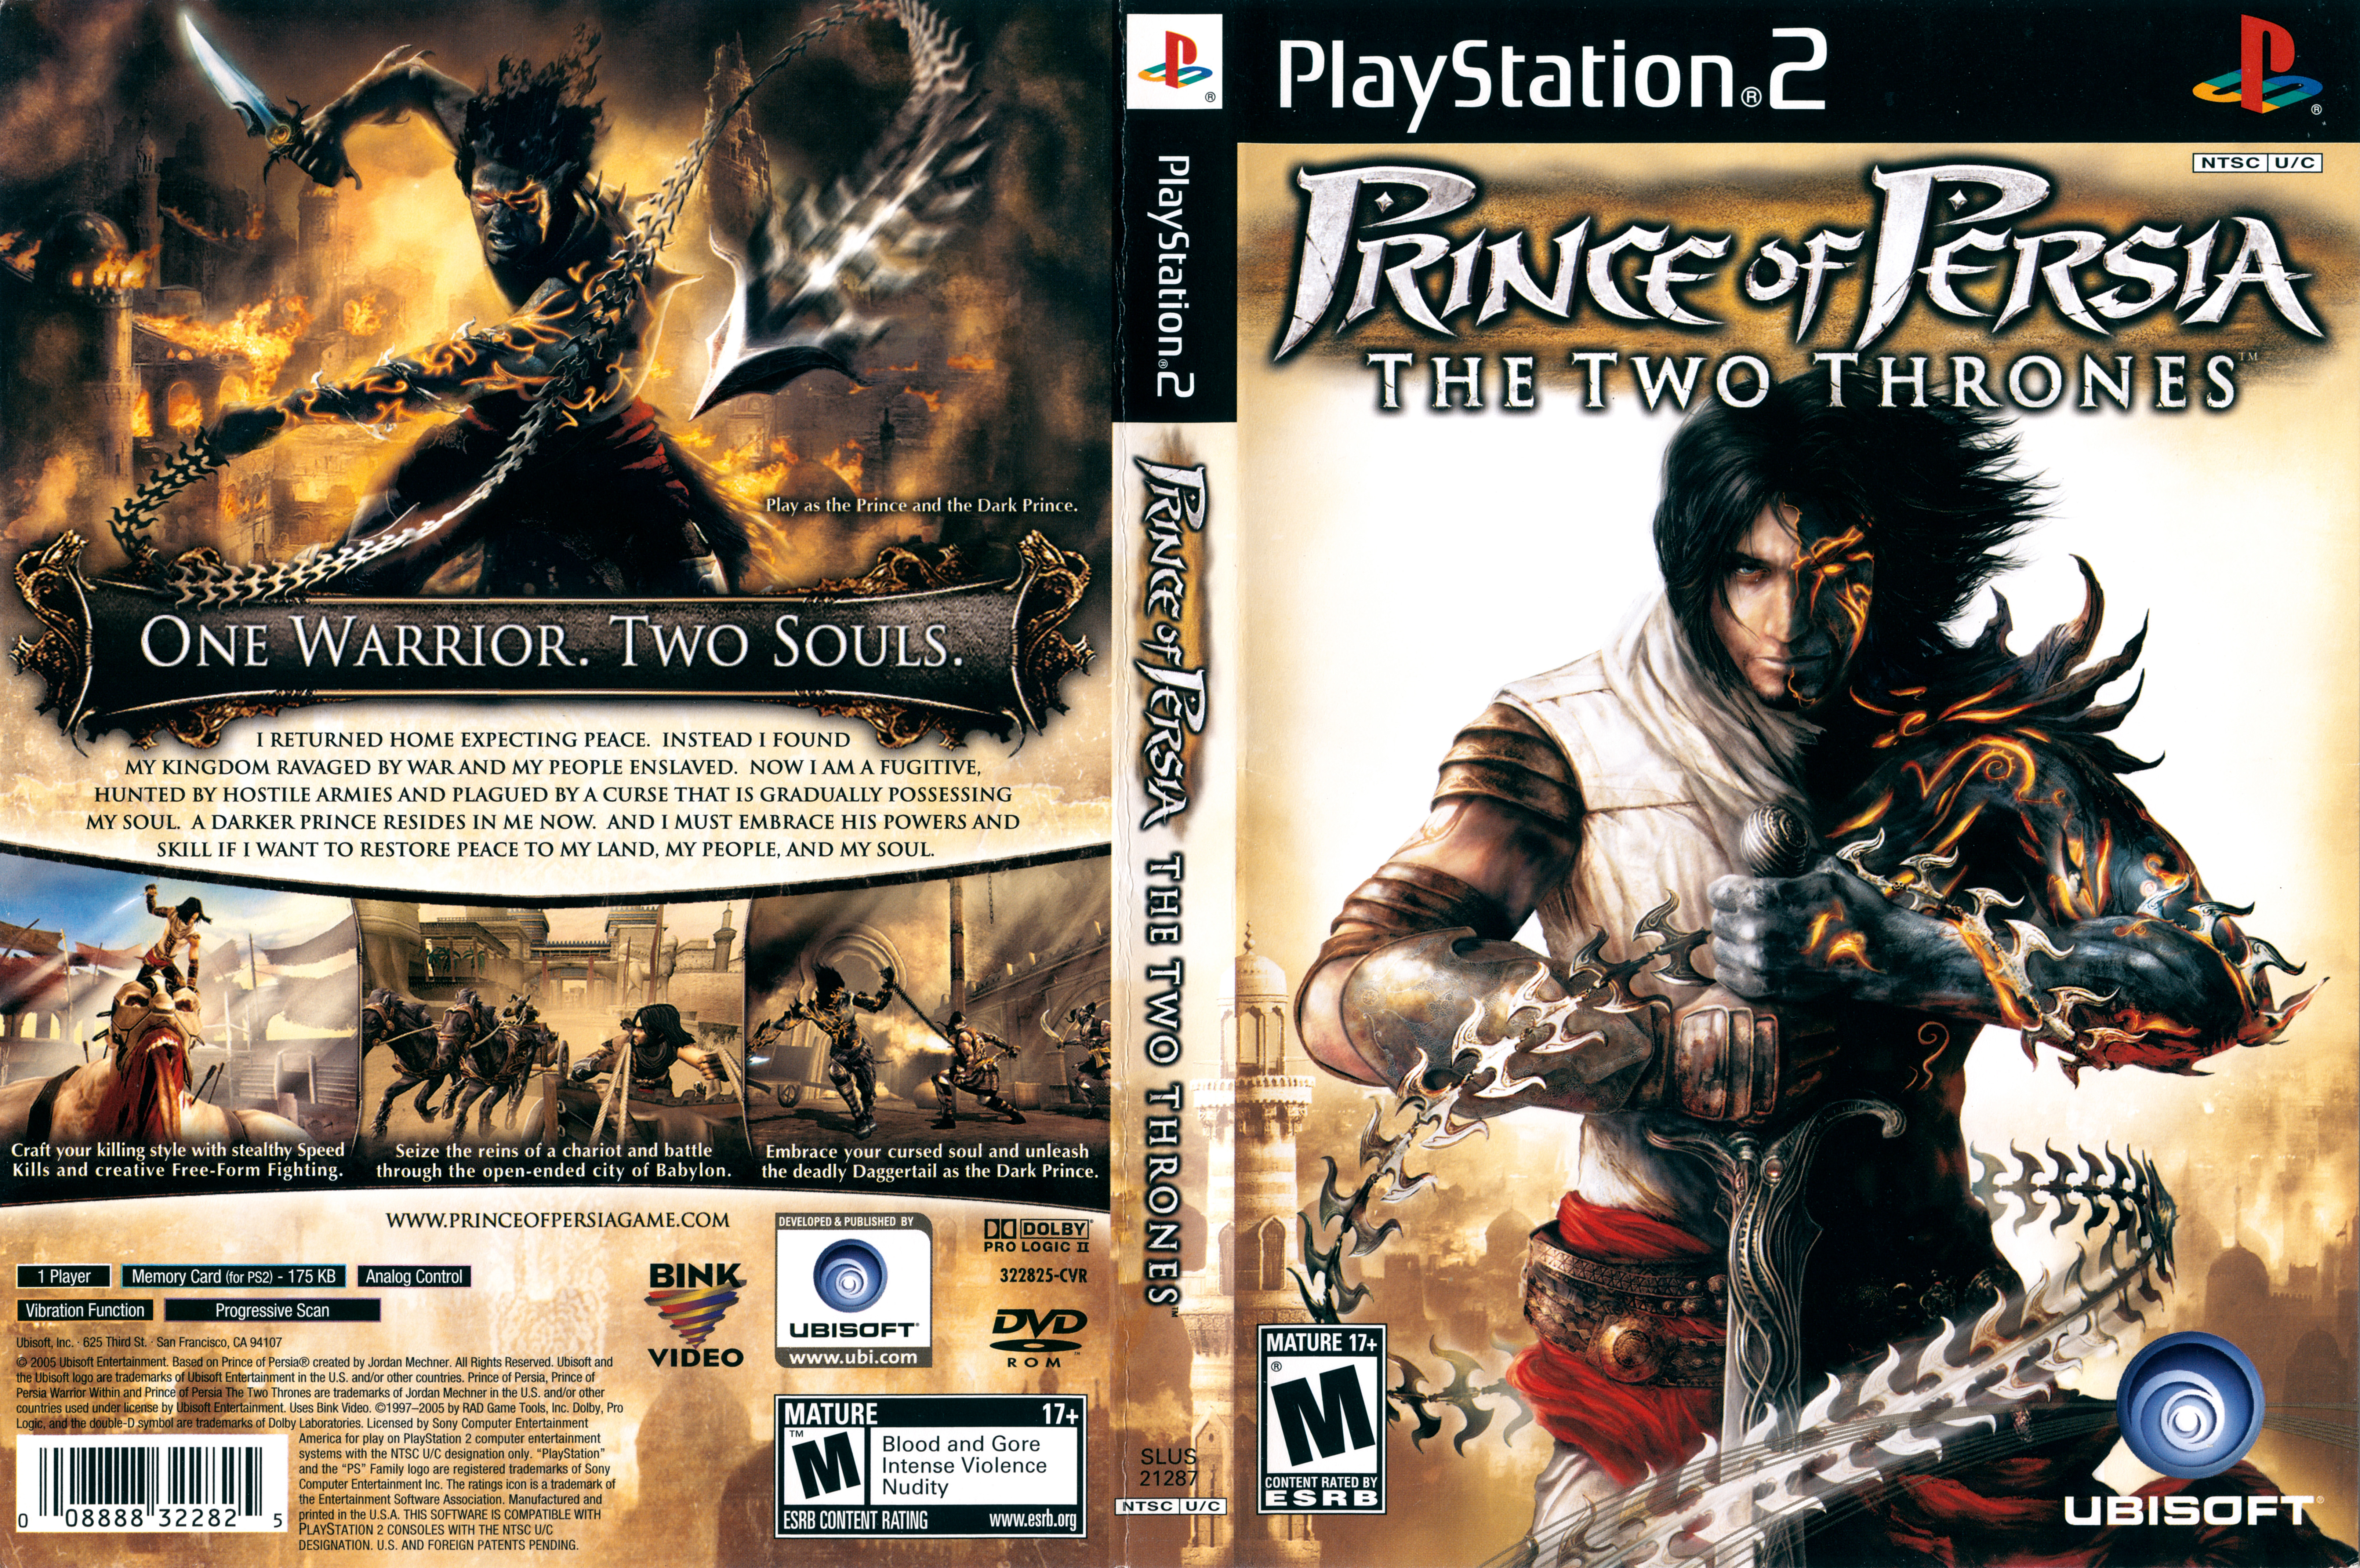 Prince of Persia: The Two Thrones, Sony PlayStation 2